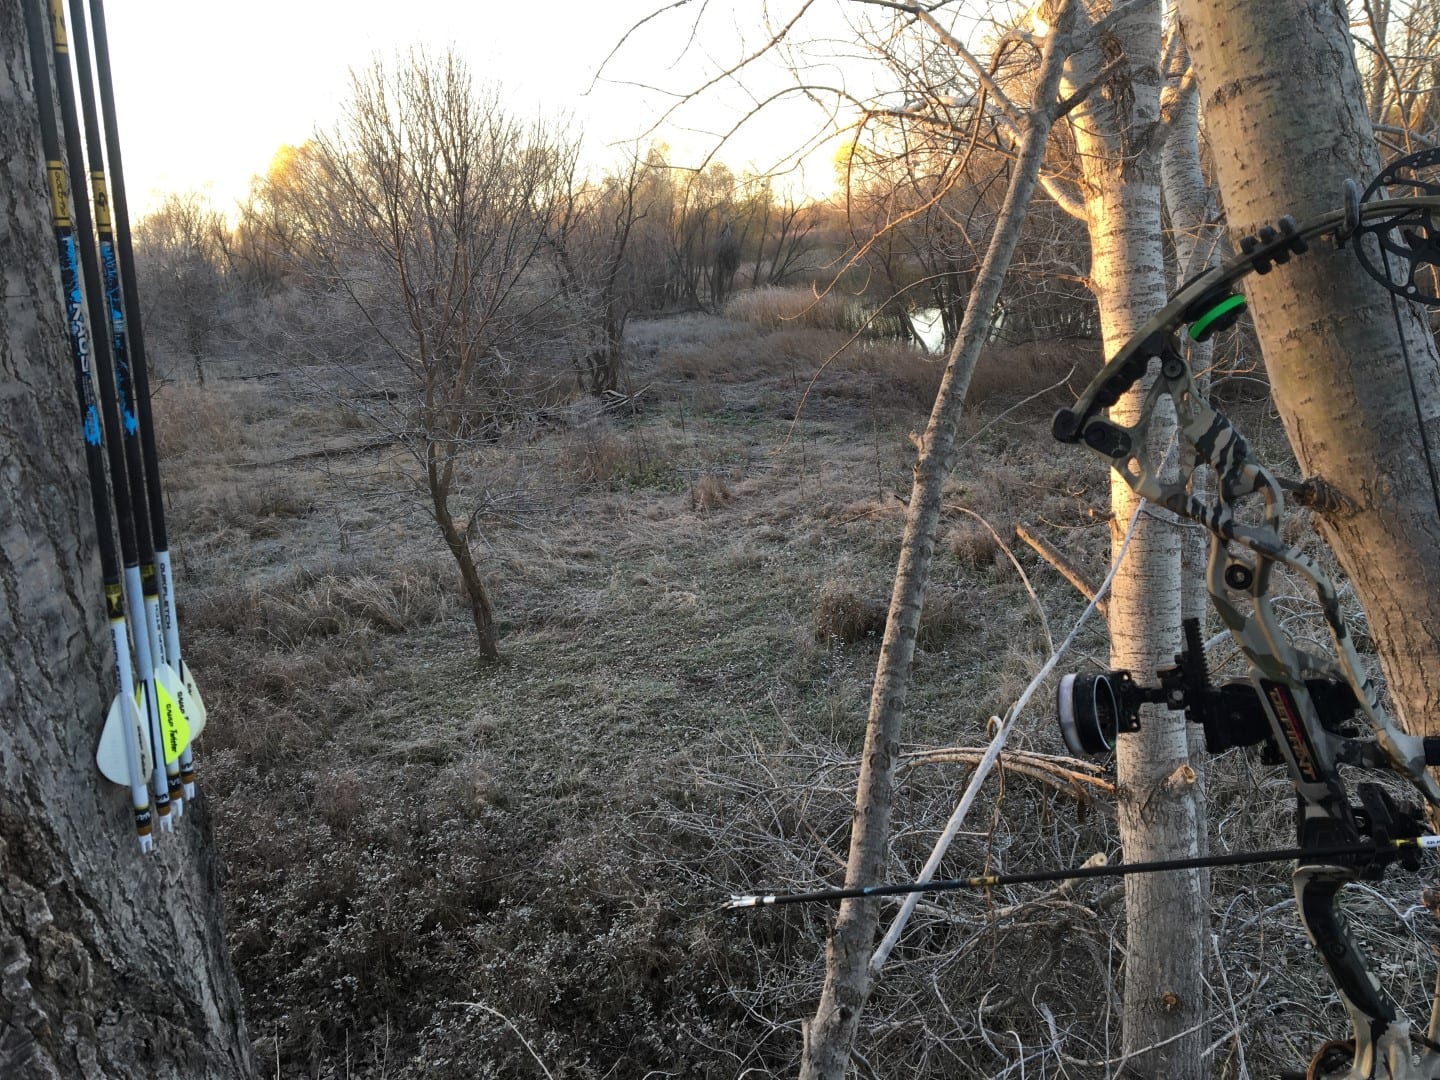 bowhunting from a Kansas treestand